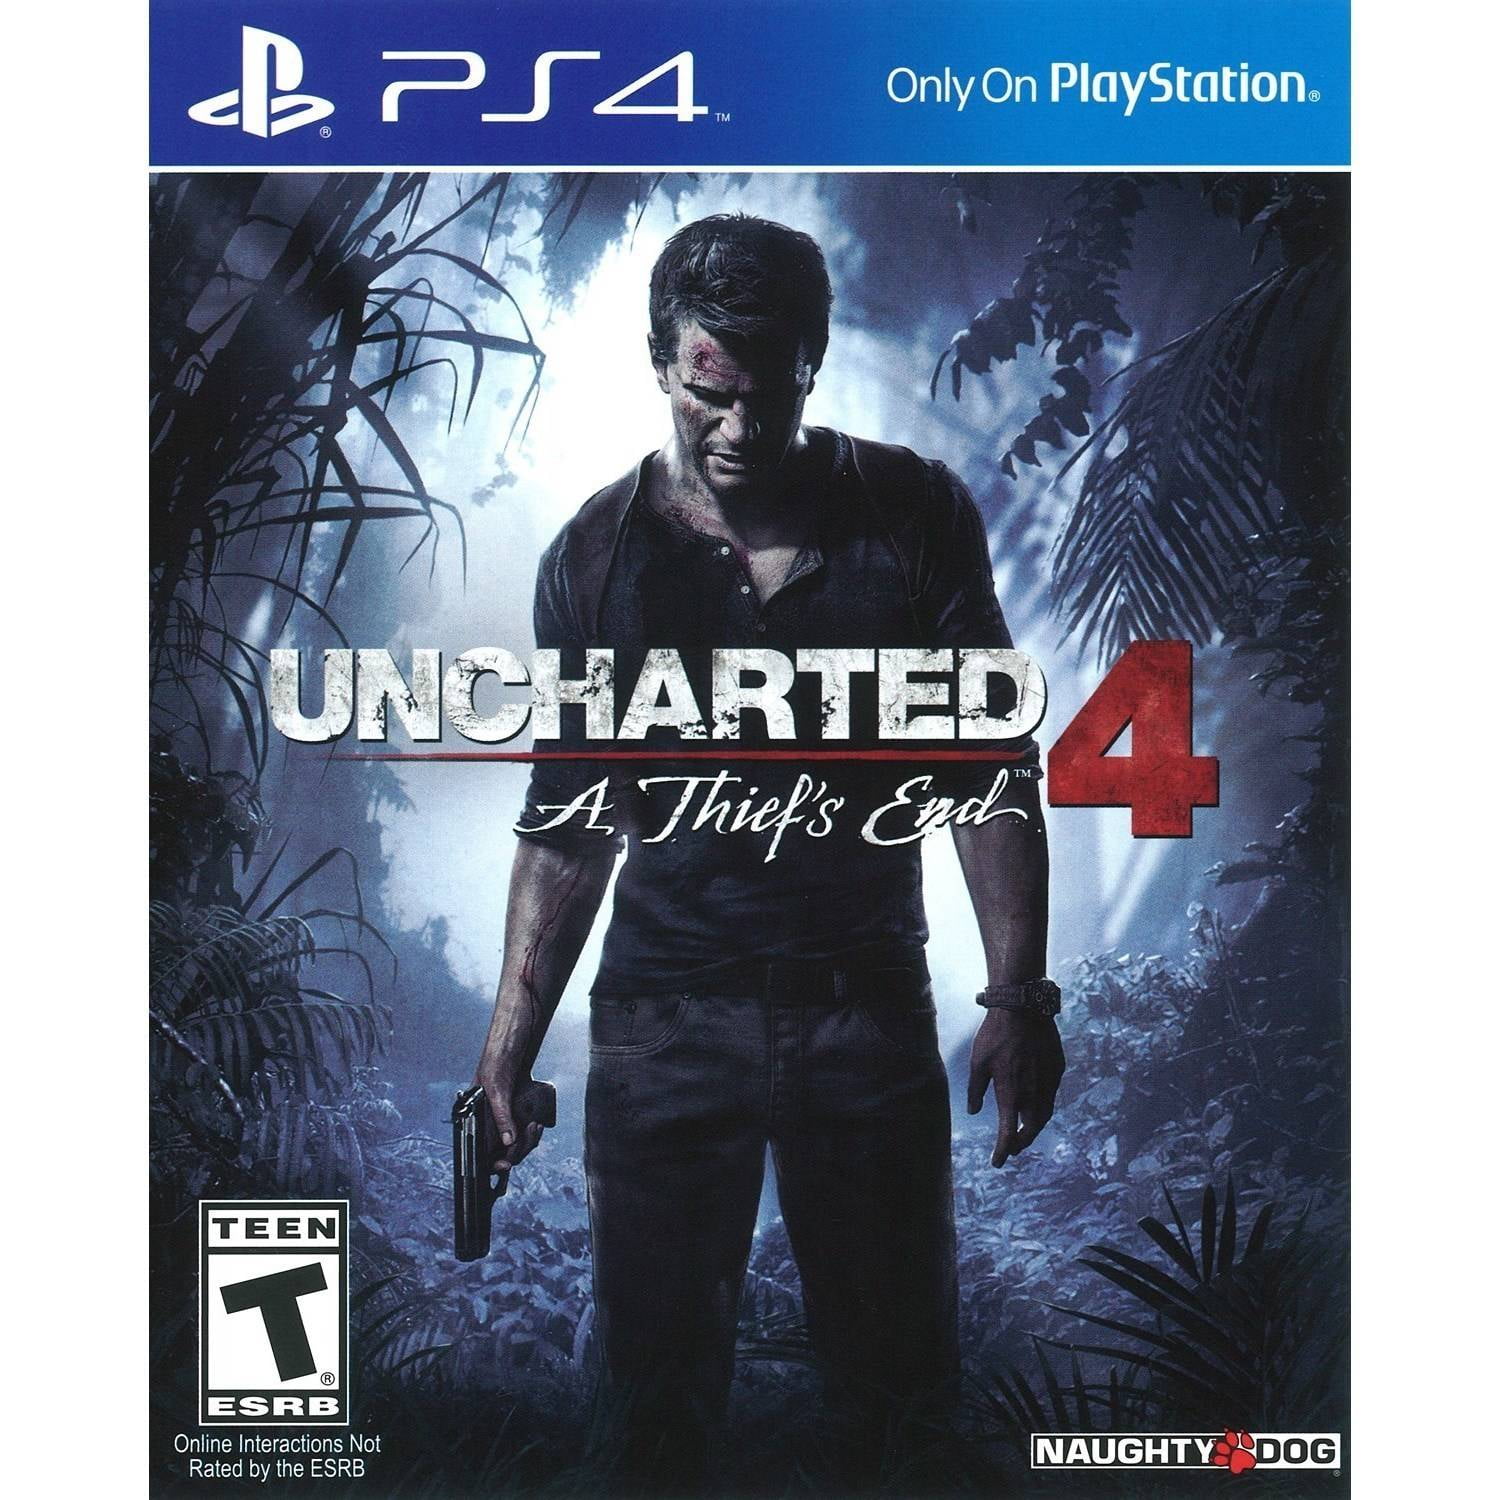 Games Like Uncharted 4: A Thief's End